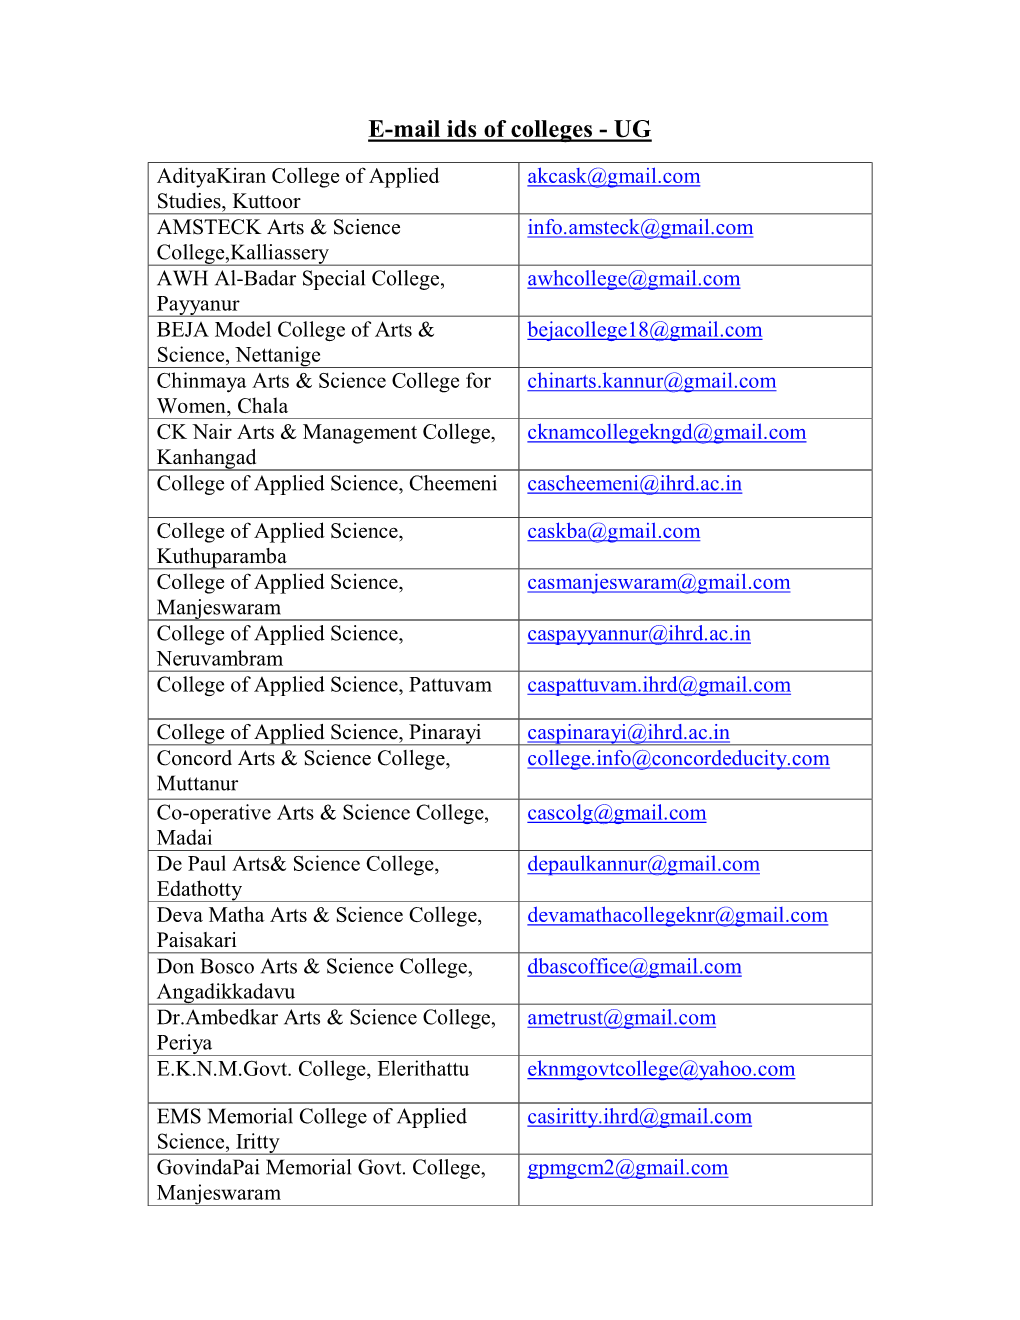 E-Mail Ids of Colleges - UG